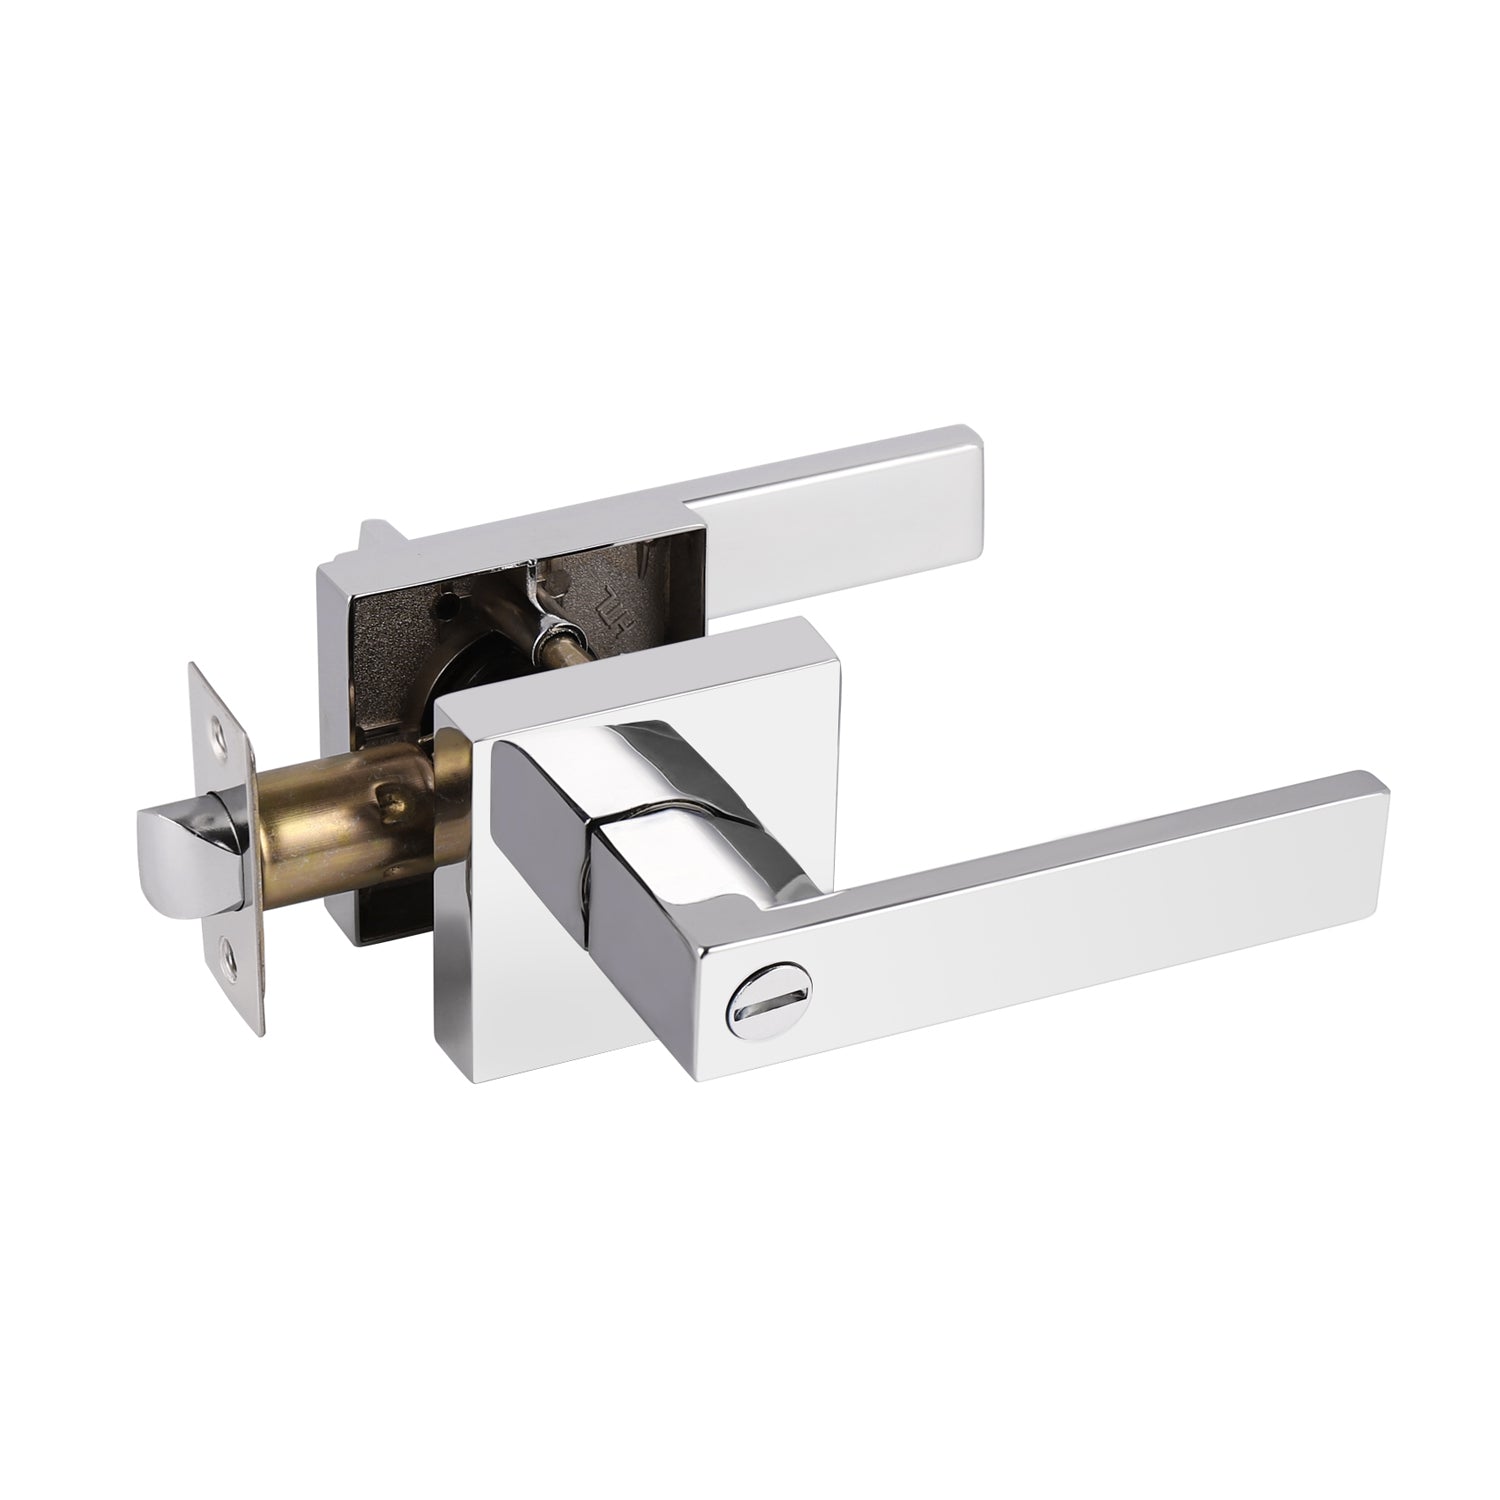 Heavy Duty Privacy Door Handles with Square Design, Polished Chrome Finish DL01PCBK